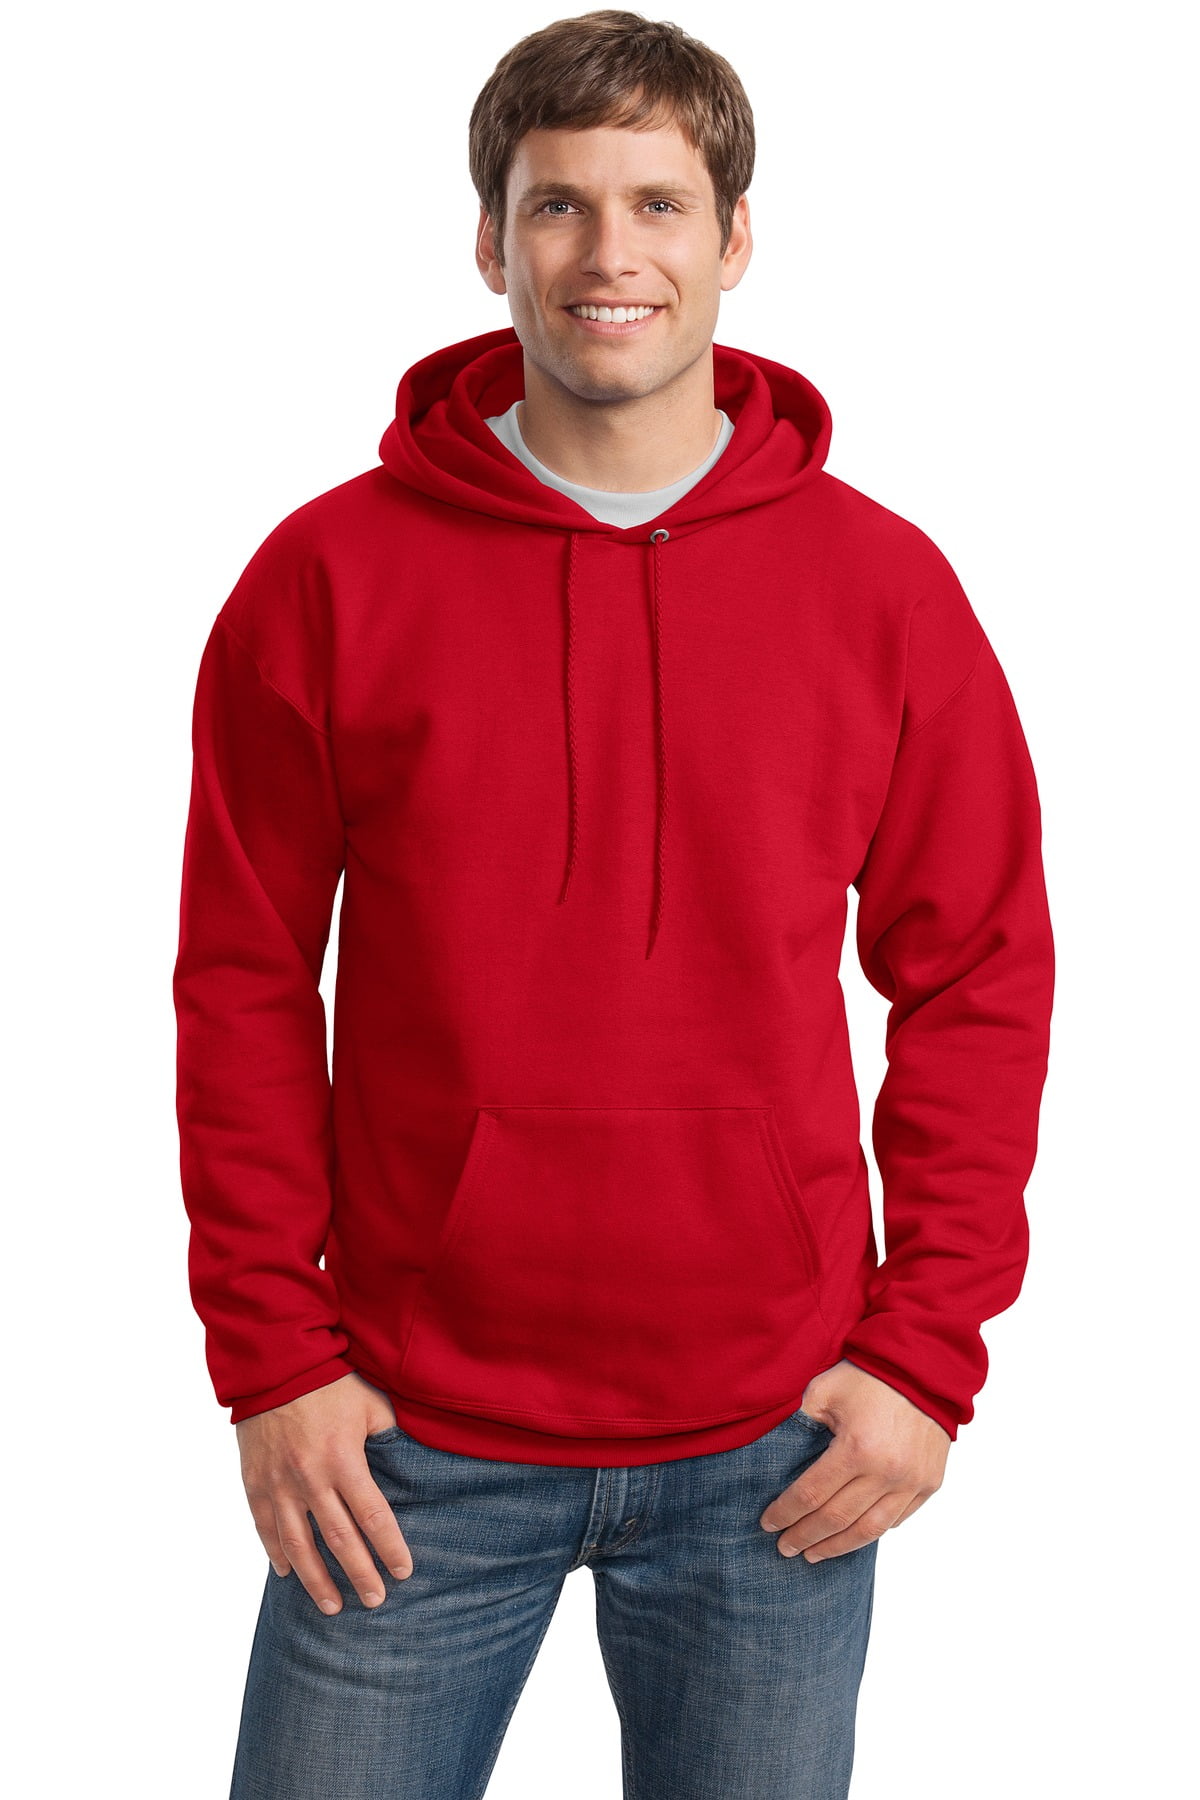 Hanes Men's Front Pouch Pocket Pullover Hooded Sweatshirt - F170 ...